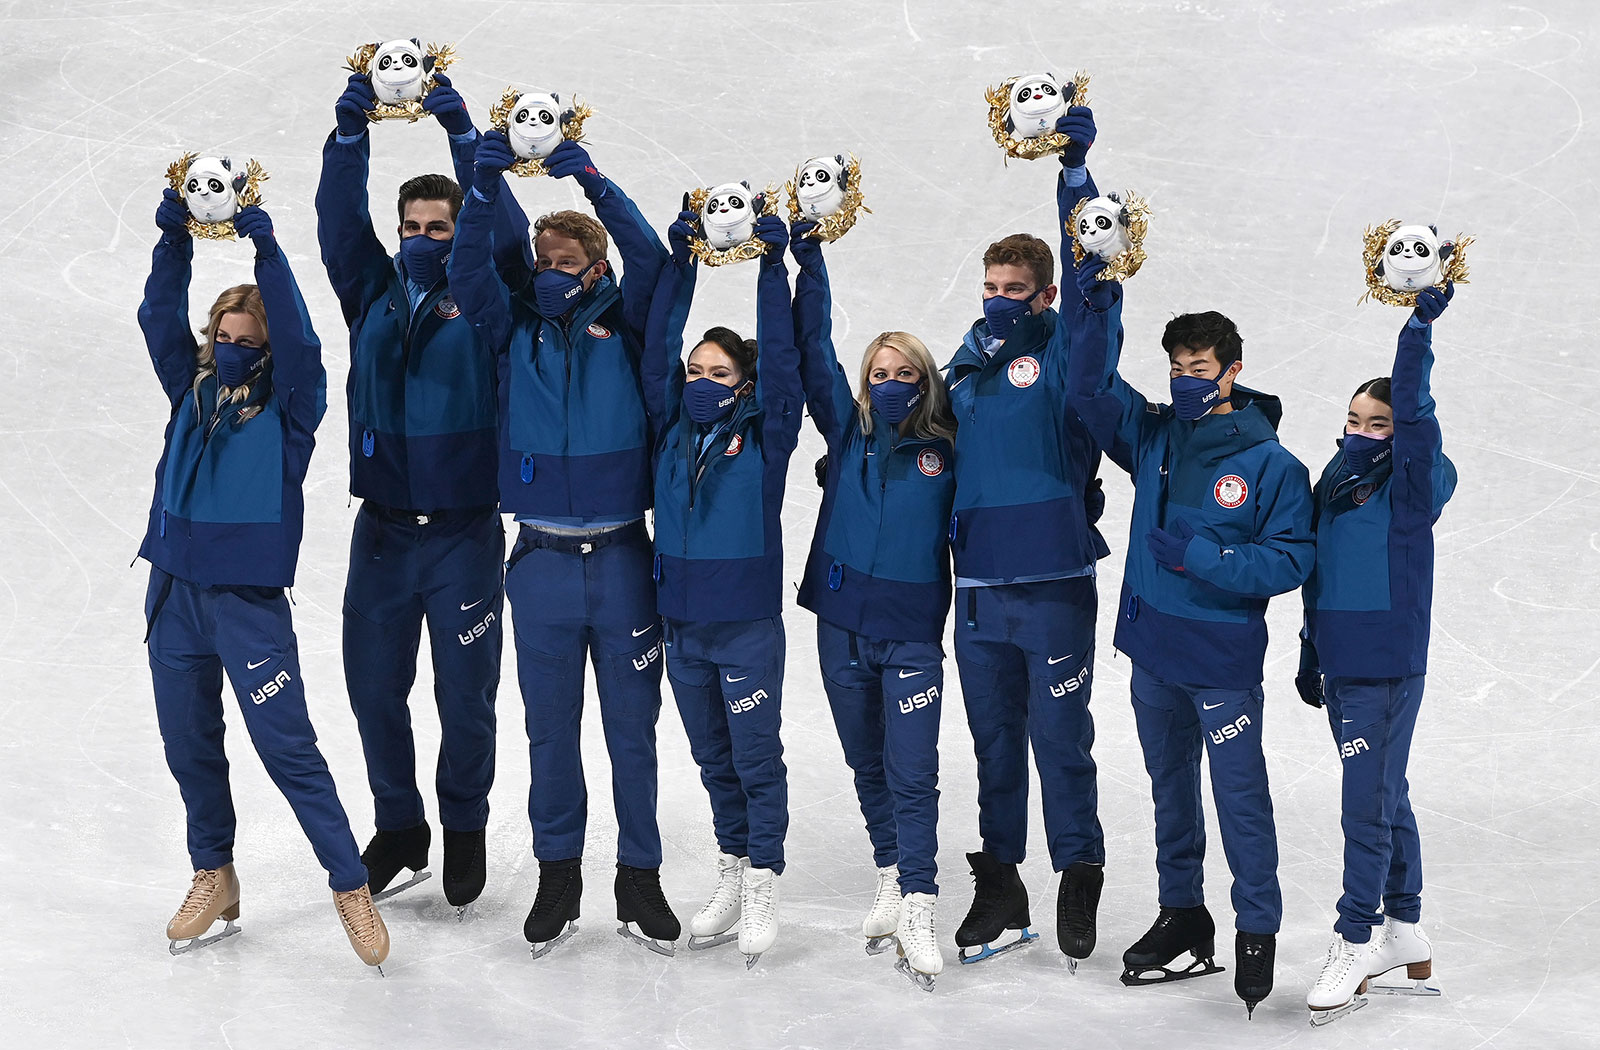 Team USA figure skaters pose for photos during the flower ceremony for the team event on February 7.